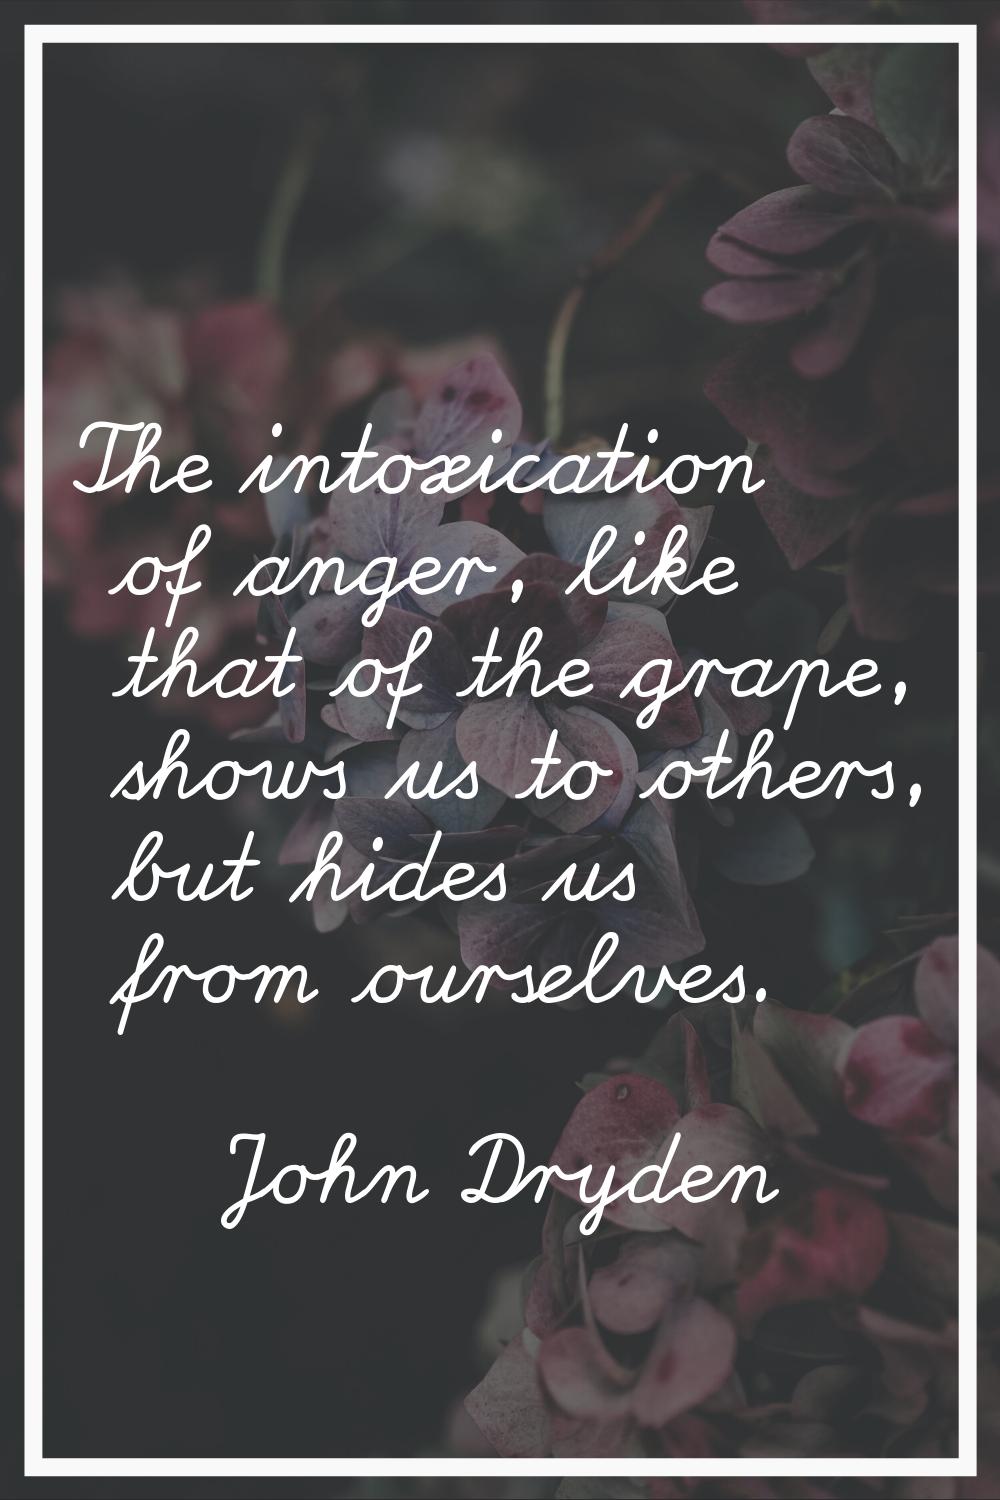 The intoxication of anger, like that of the grape, shows us to others, but hides us from ourselves.